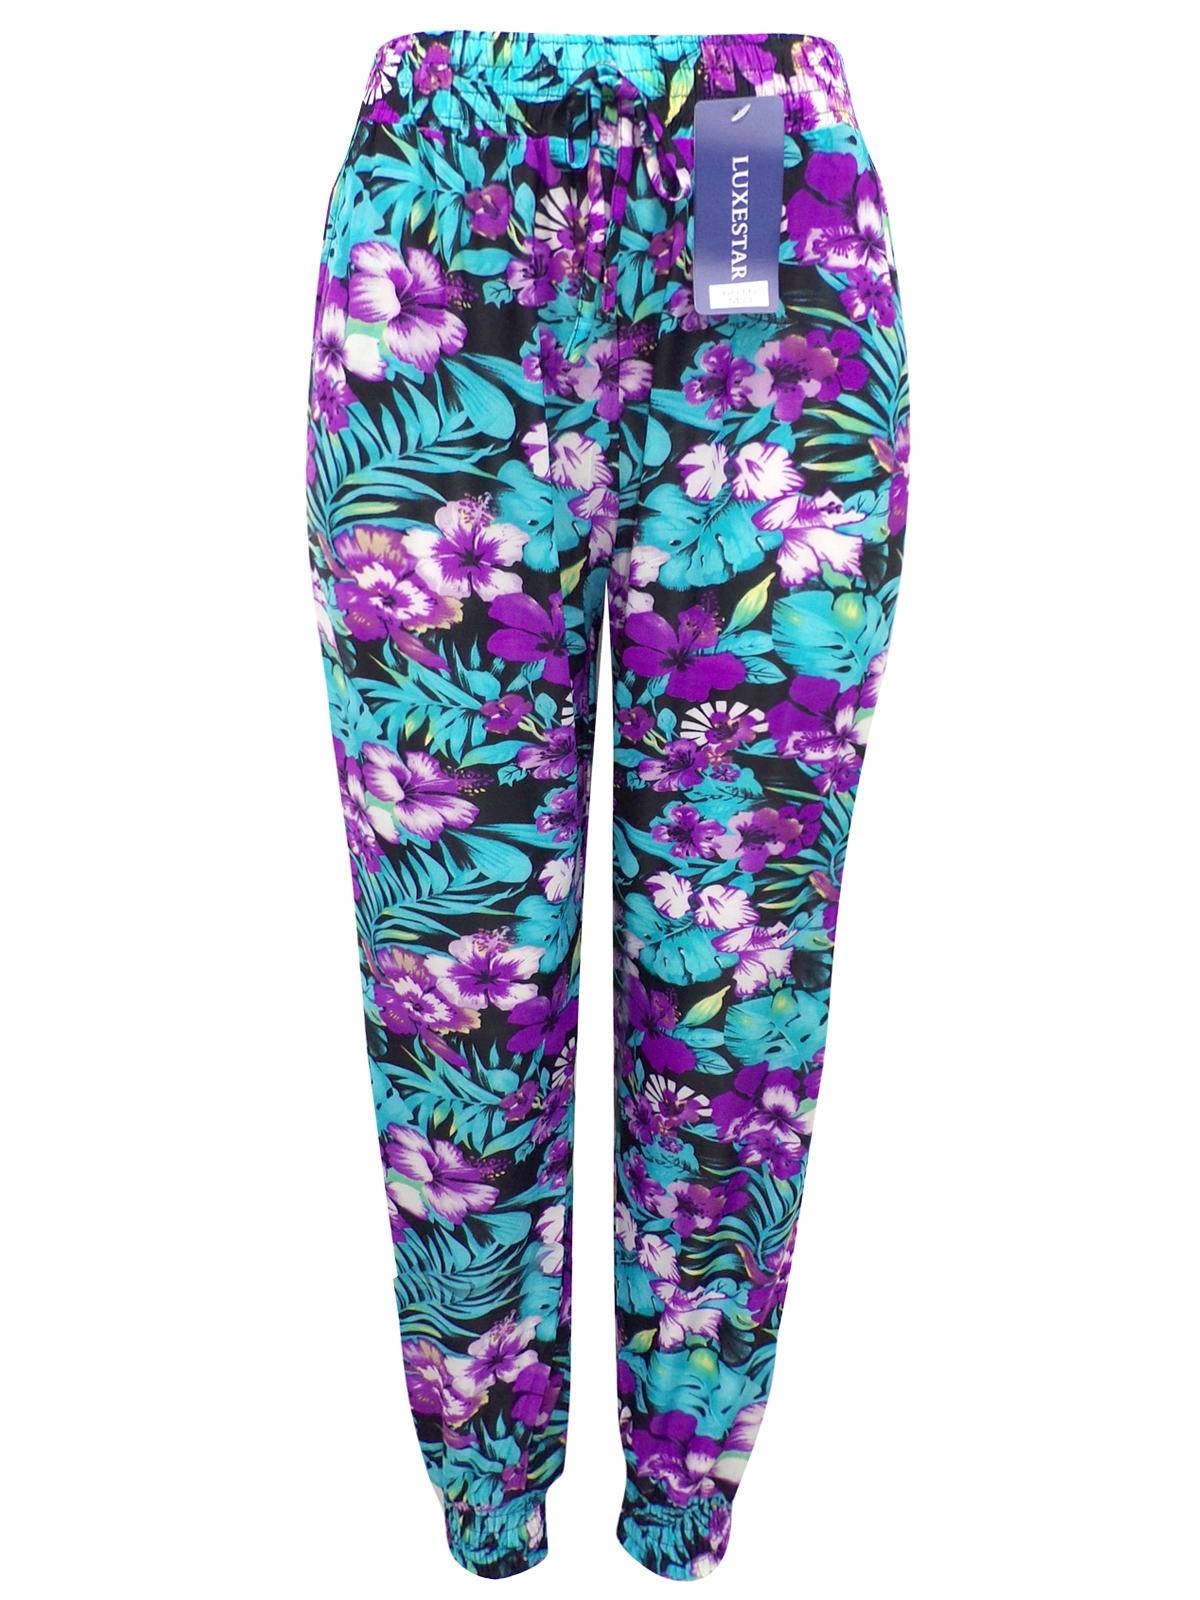 Luxestar - - Luxestar TURQUOISE Pull On Printed Harem Trousers - Size ...